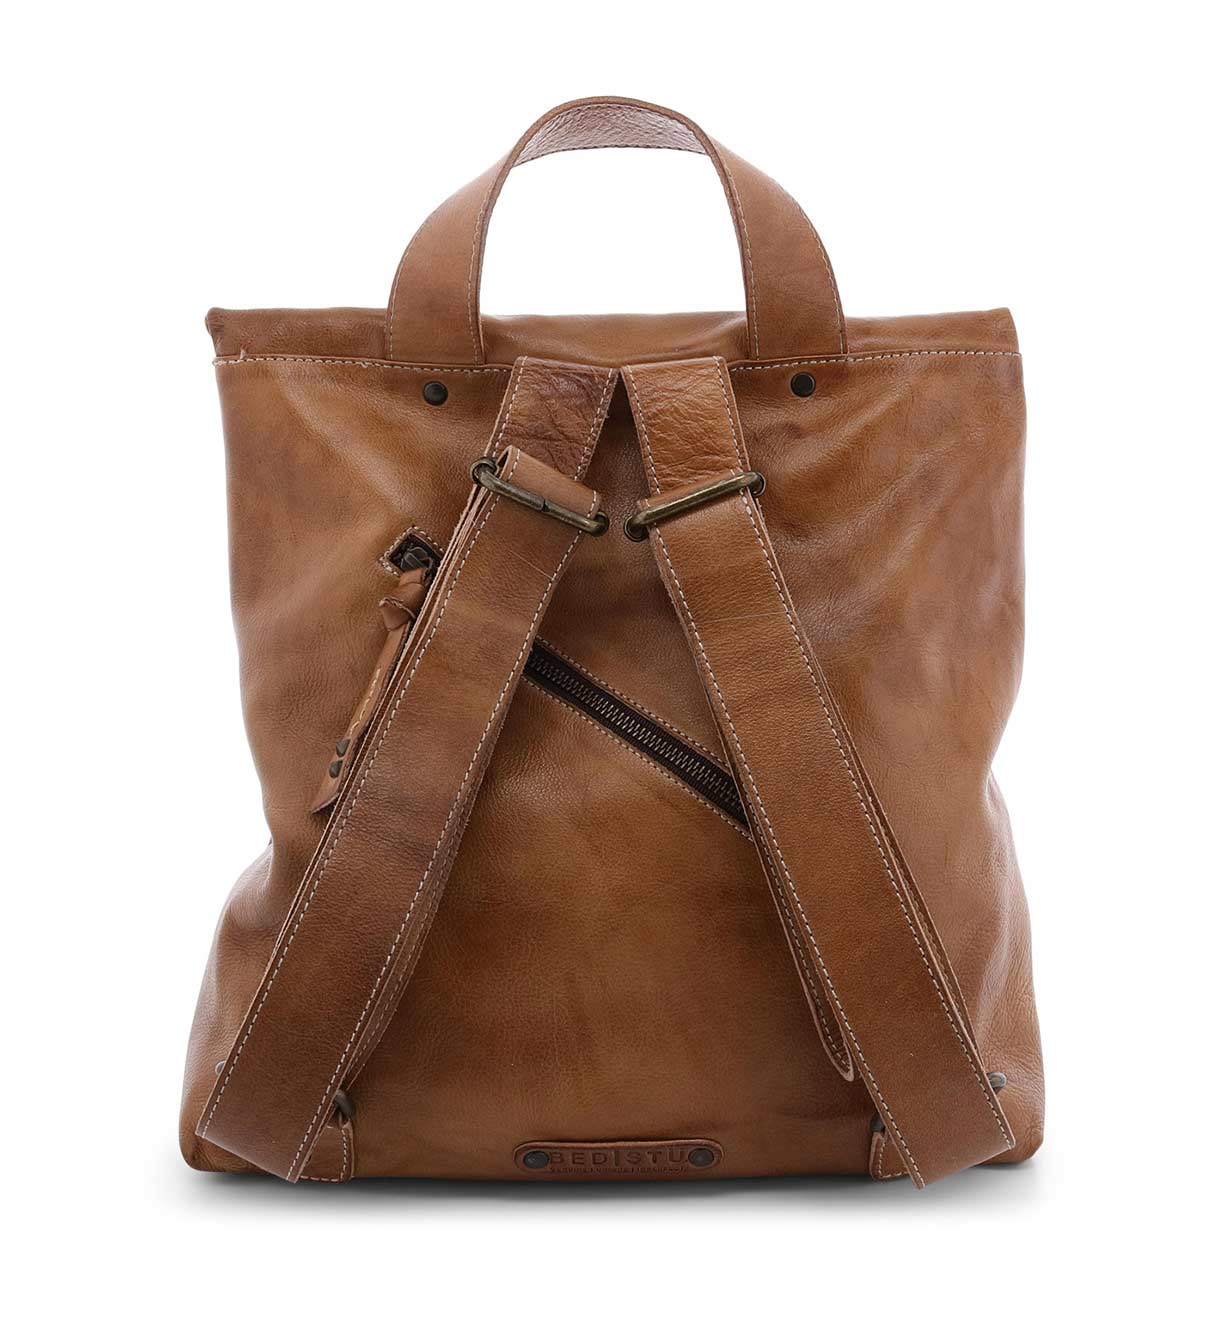 A tan Howie leather backpack with two straps by Bed Stu.